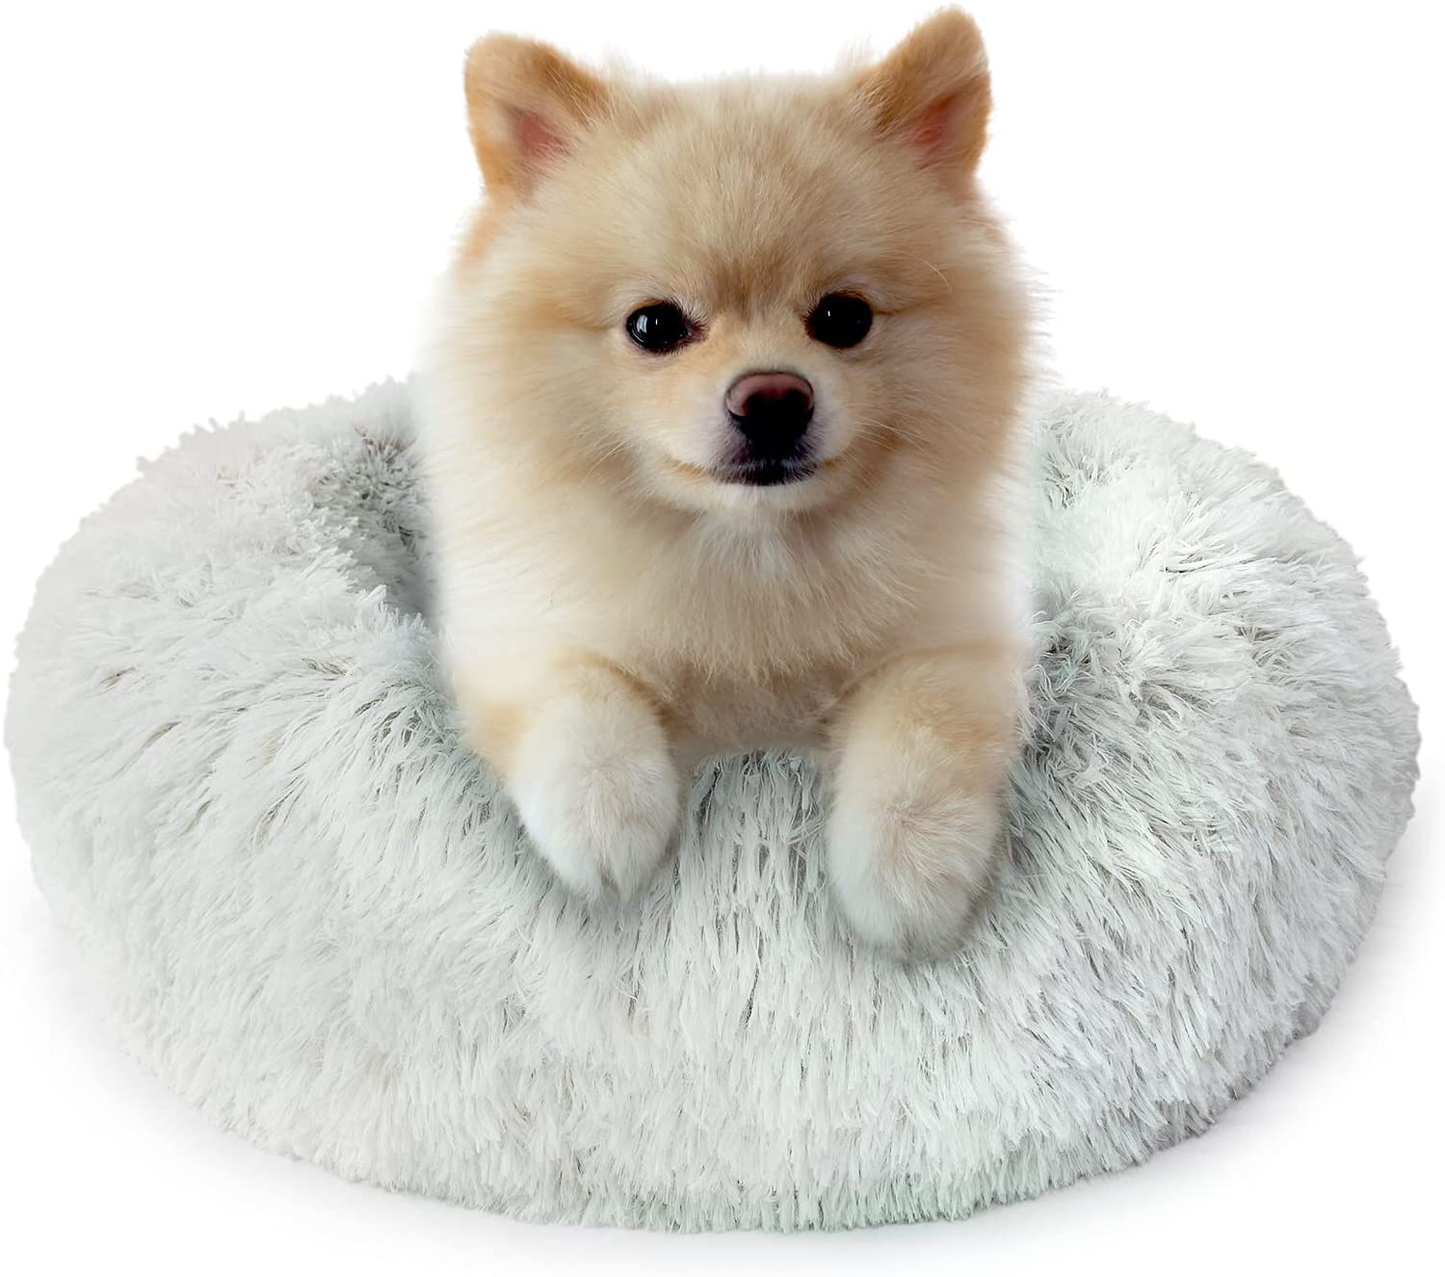 Fluffy Dog Bed for Small Dogs and Cats,Original Calming Donut Dog Bed,Washable Cozy Dog Bed with Extra Soft Anti-Slip Bottom, Self Warming Styles&Multiple Size 28“